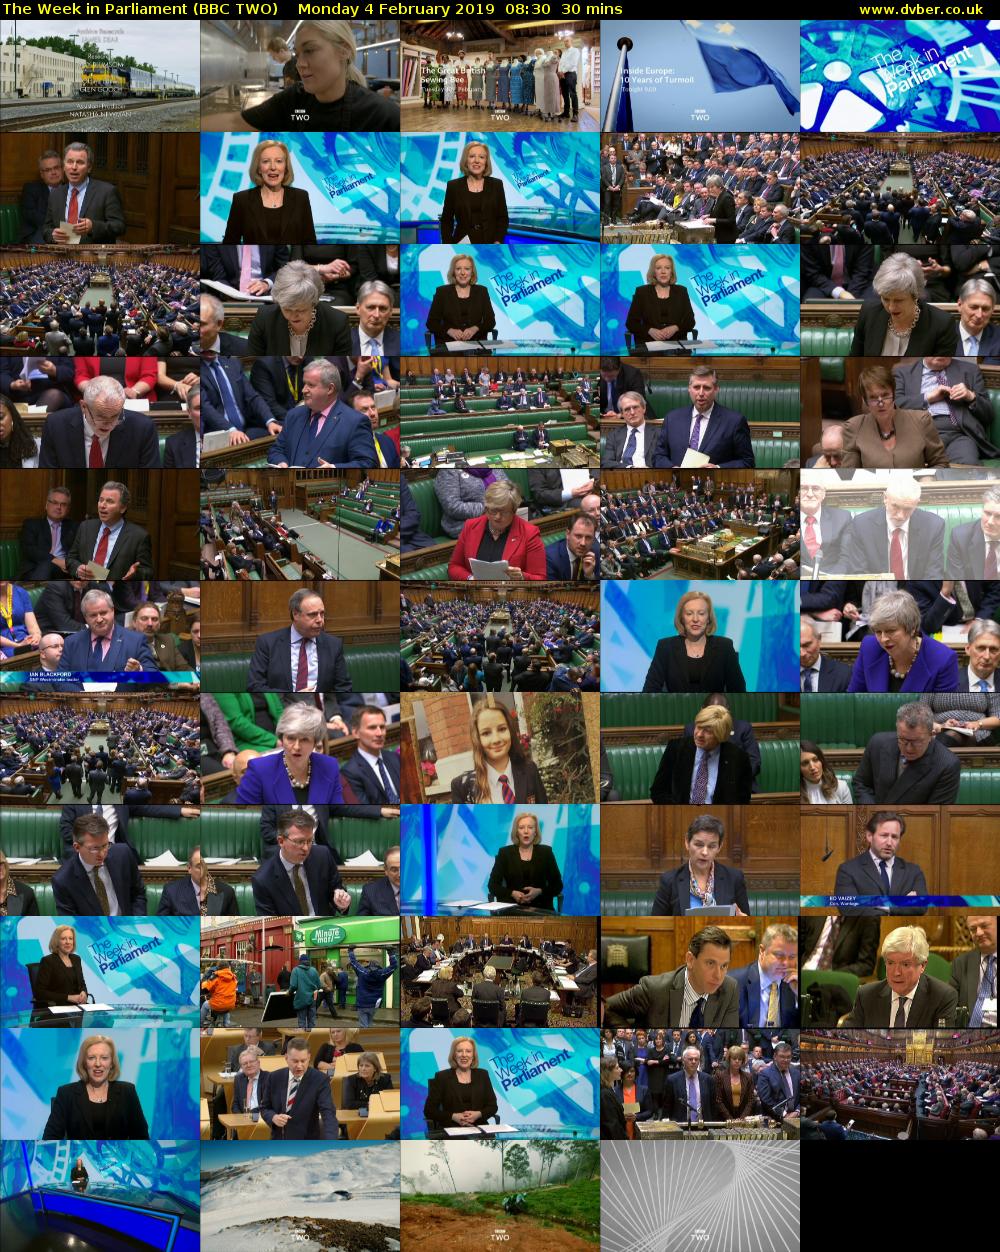 The Week in Parliament (BBC TWO) Monday 4 February 2019 08:30 - 09:00